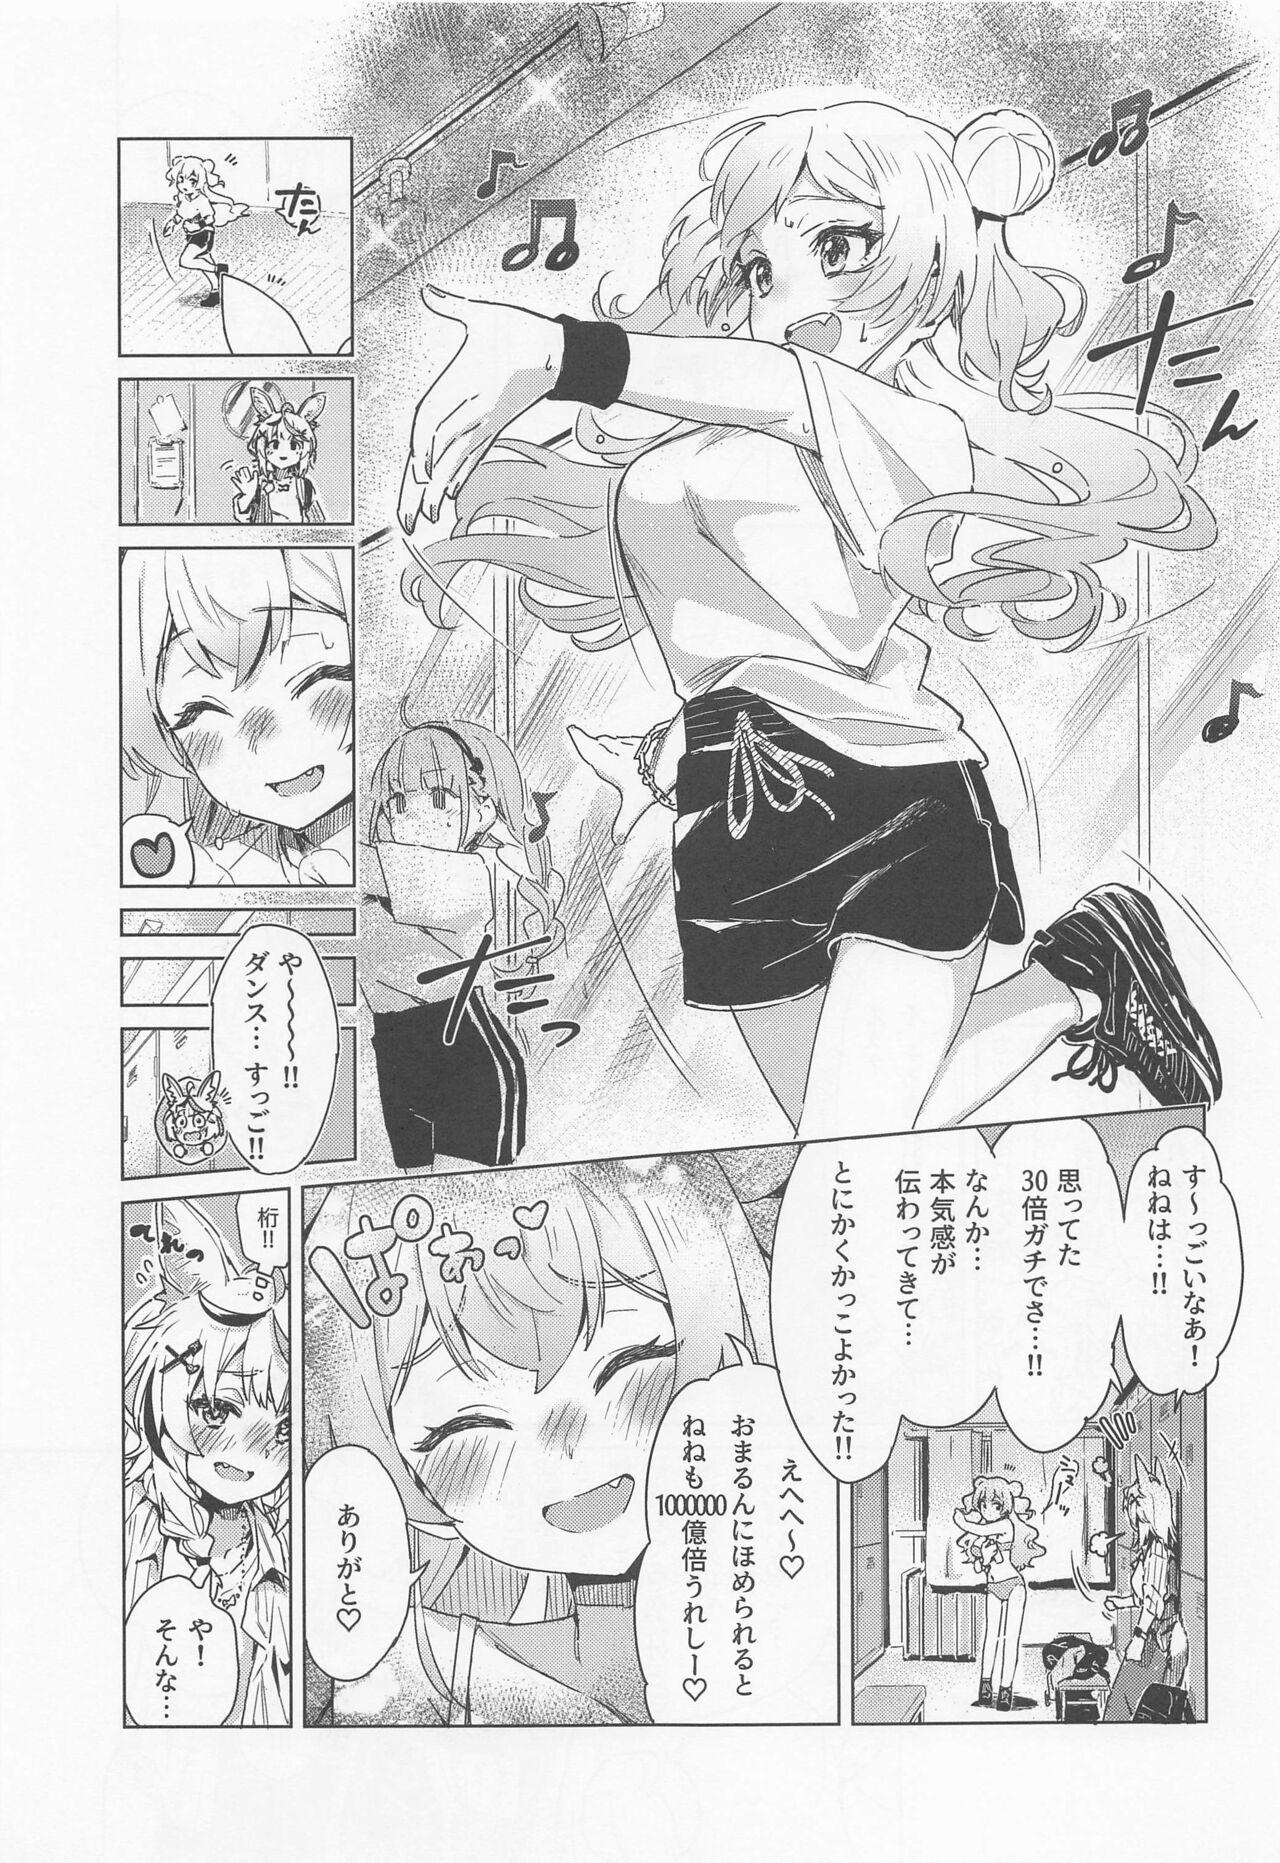 Hardcore Porno Fennec wa Iseijin no Yume o Miru ka - Does The Fennec Dream of The Lovely Visitor? - Hololive Cruising - Page 6